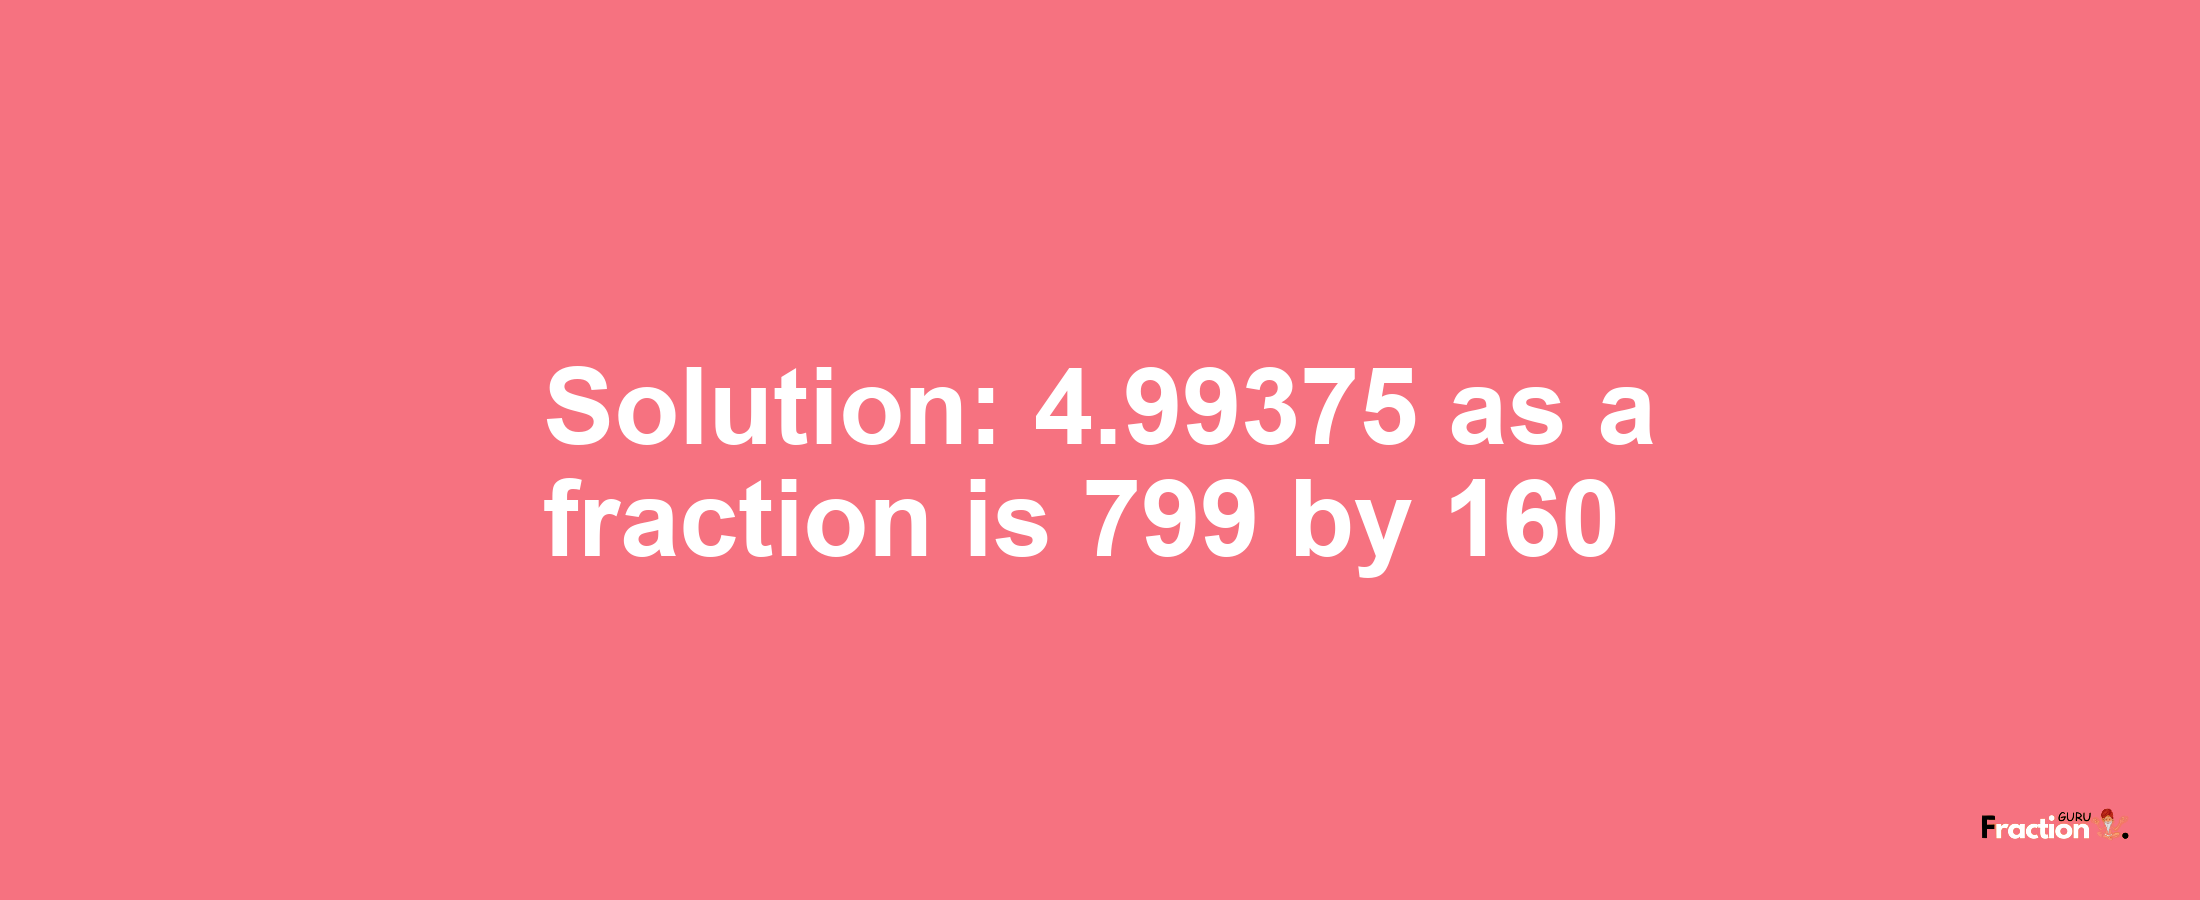 Solution:4.99375 as a fraction is 799/160